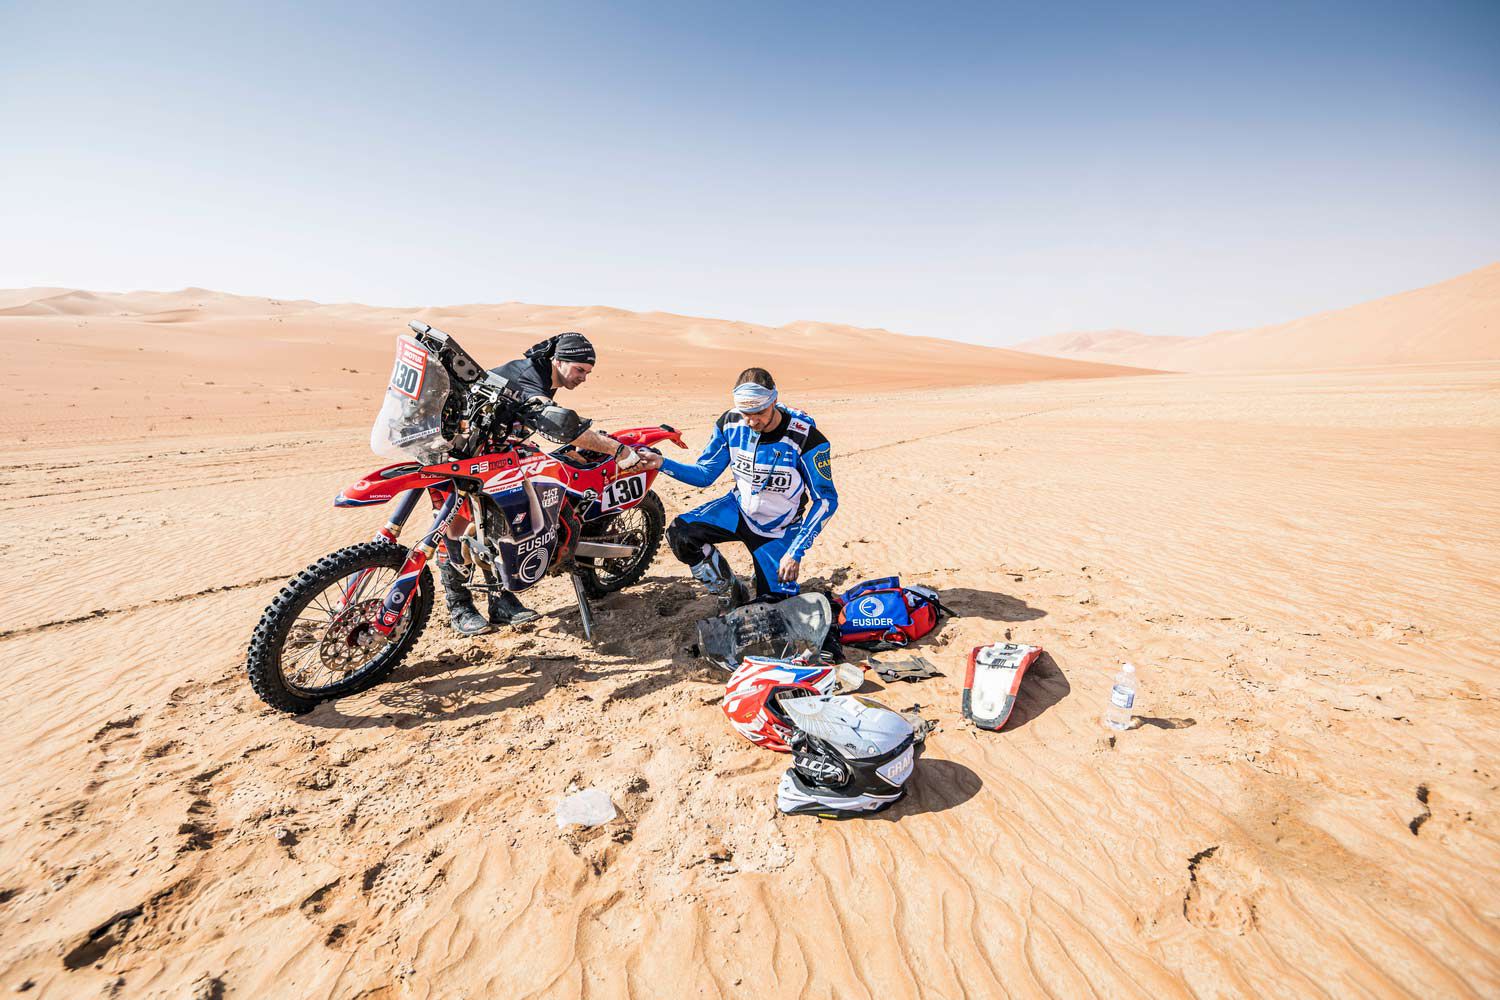 Eufrasio Anghileri, RS Moto Racing, takes stock of his Honda (and whatever went wrong) during Stage 11, between Shaybah and the Empty Quarter. His father, Antonio, competed on a Gilera in the ’90s.